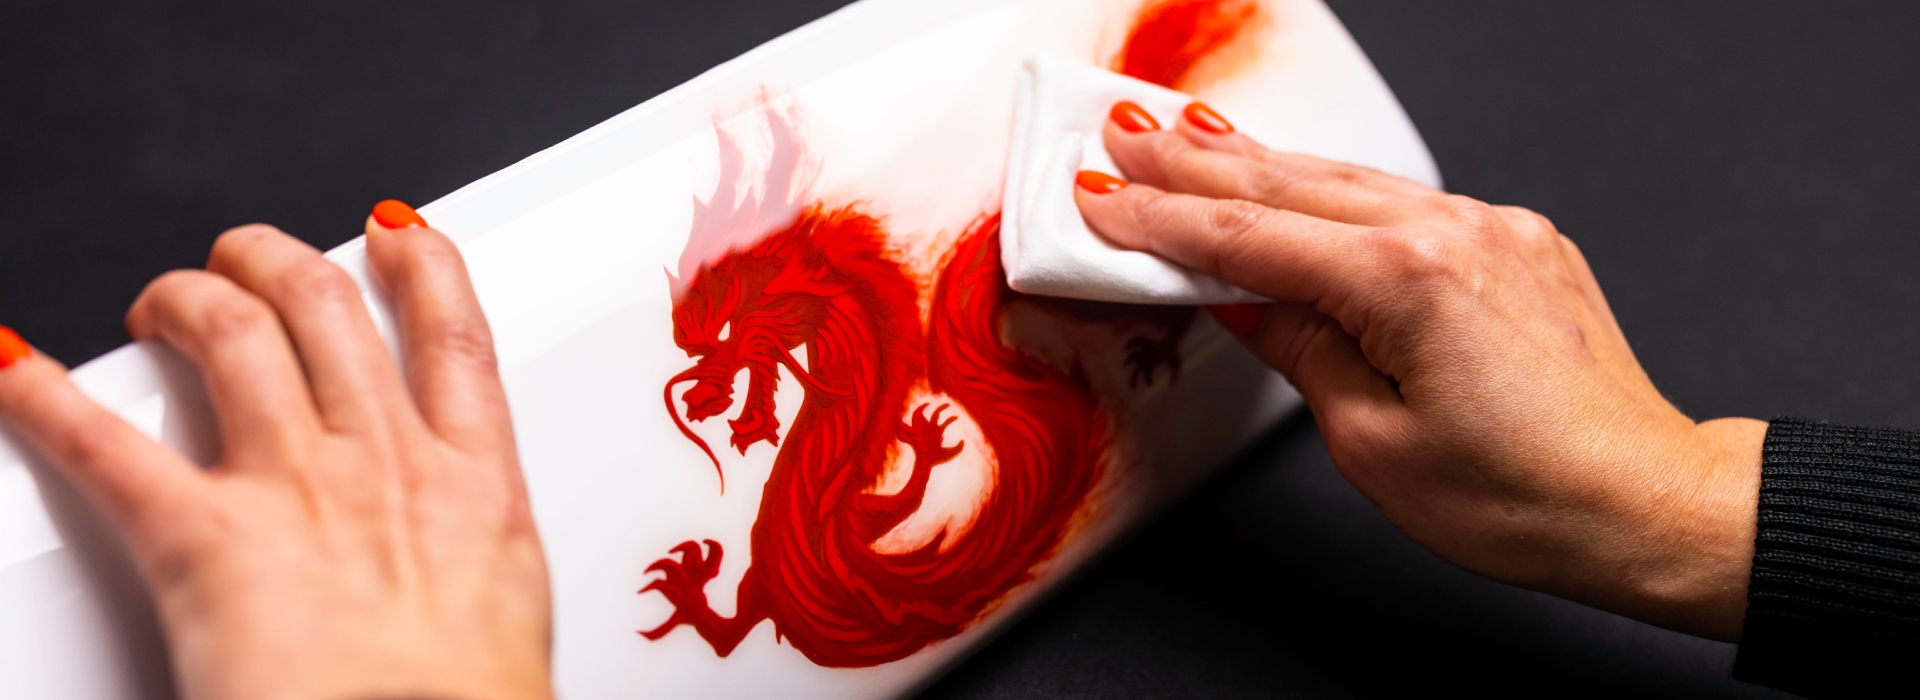 Rolls-Royce "Year of the Dragon" – Special Edition in Honor of Lunar New Year